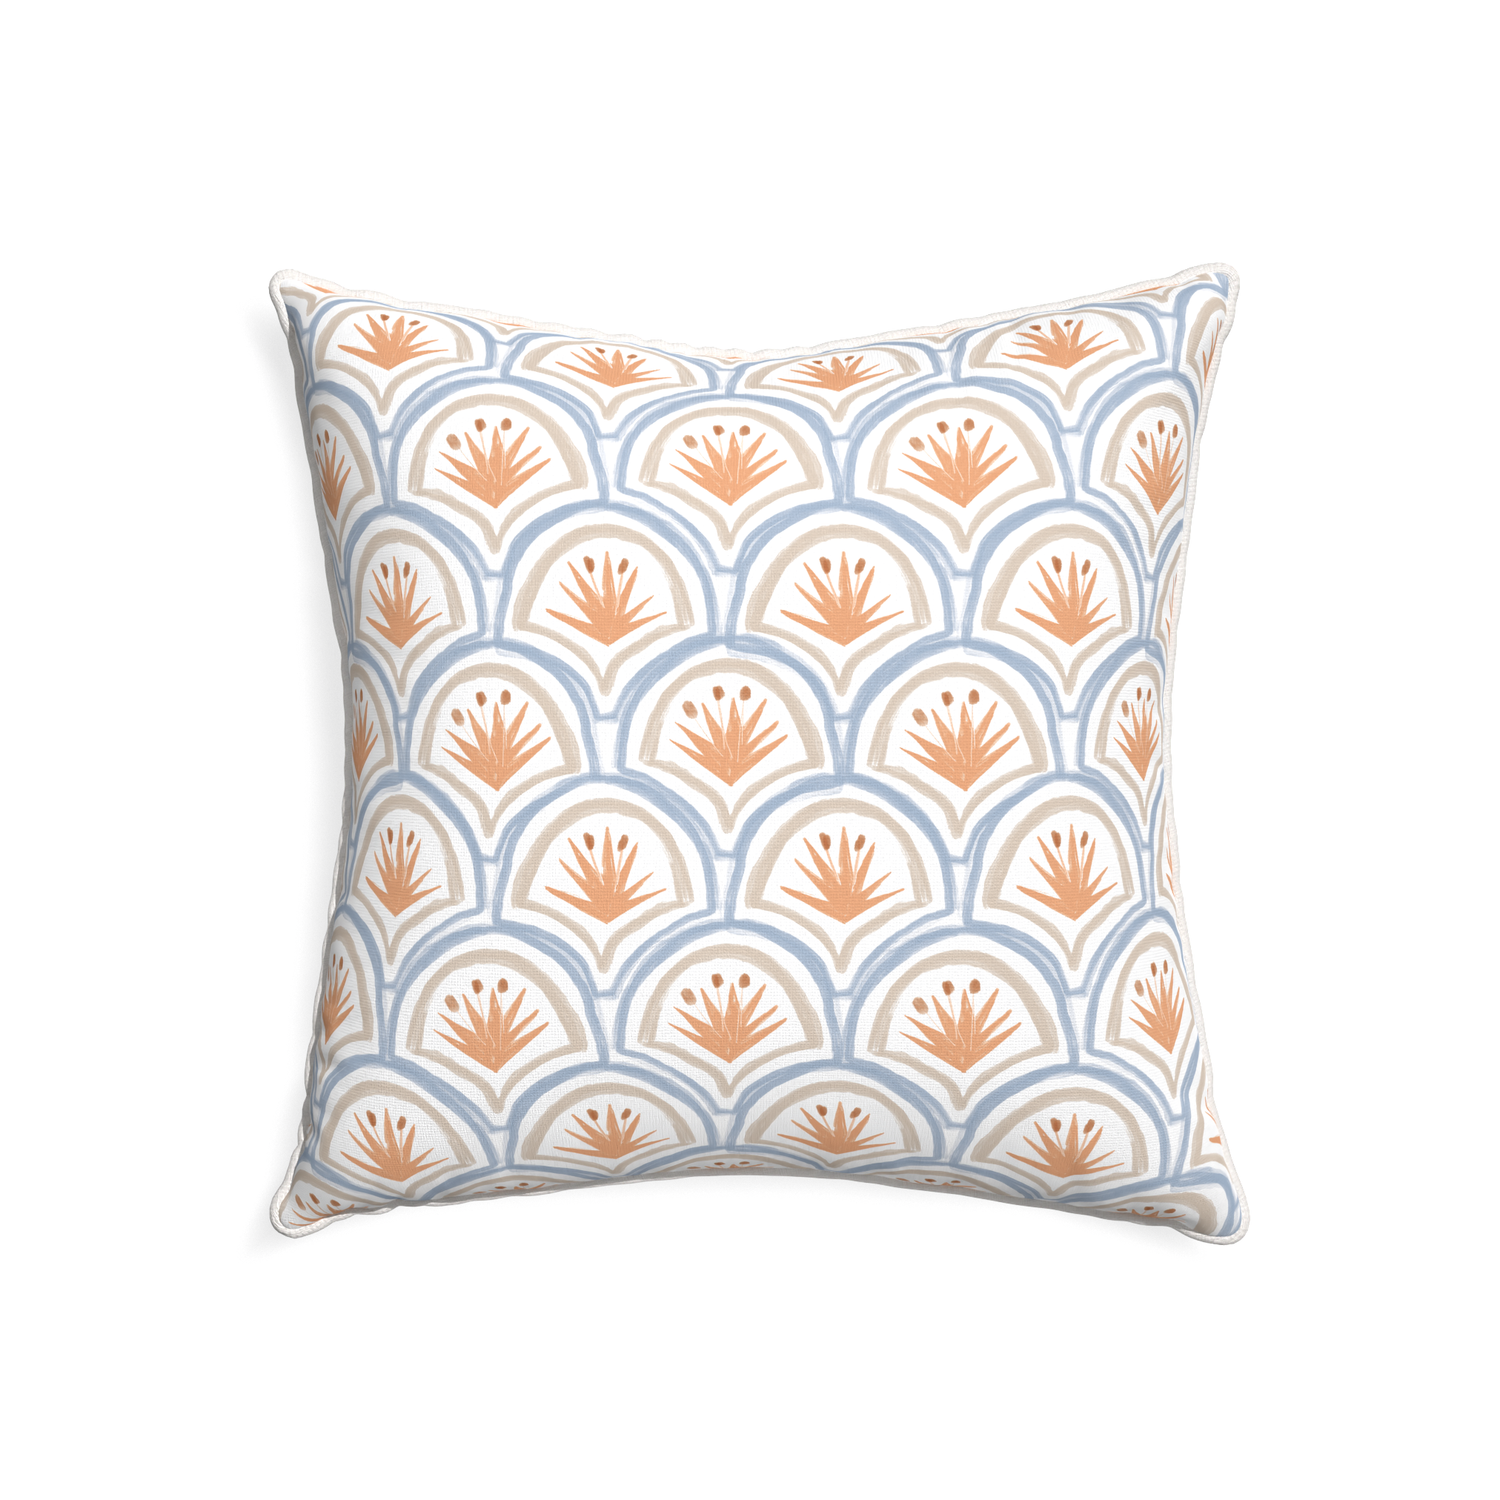 22-square thatcher apricot custom art deco palm patternpillow with snow piping on white background